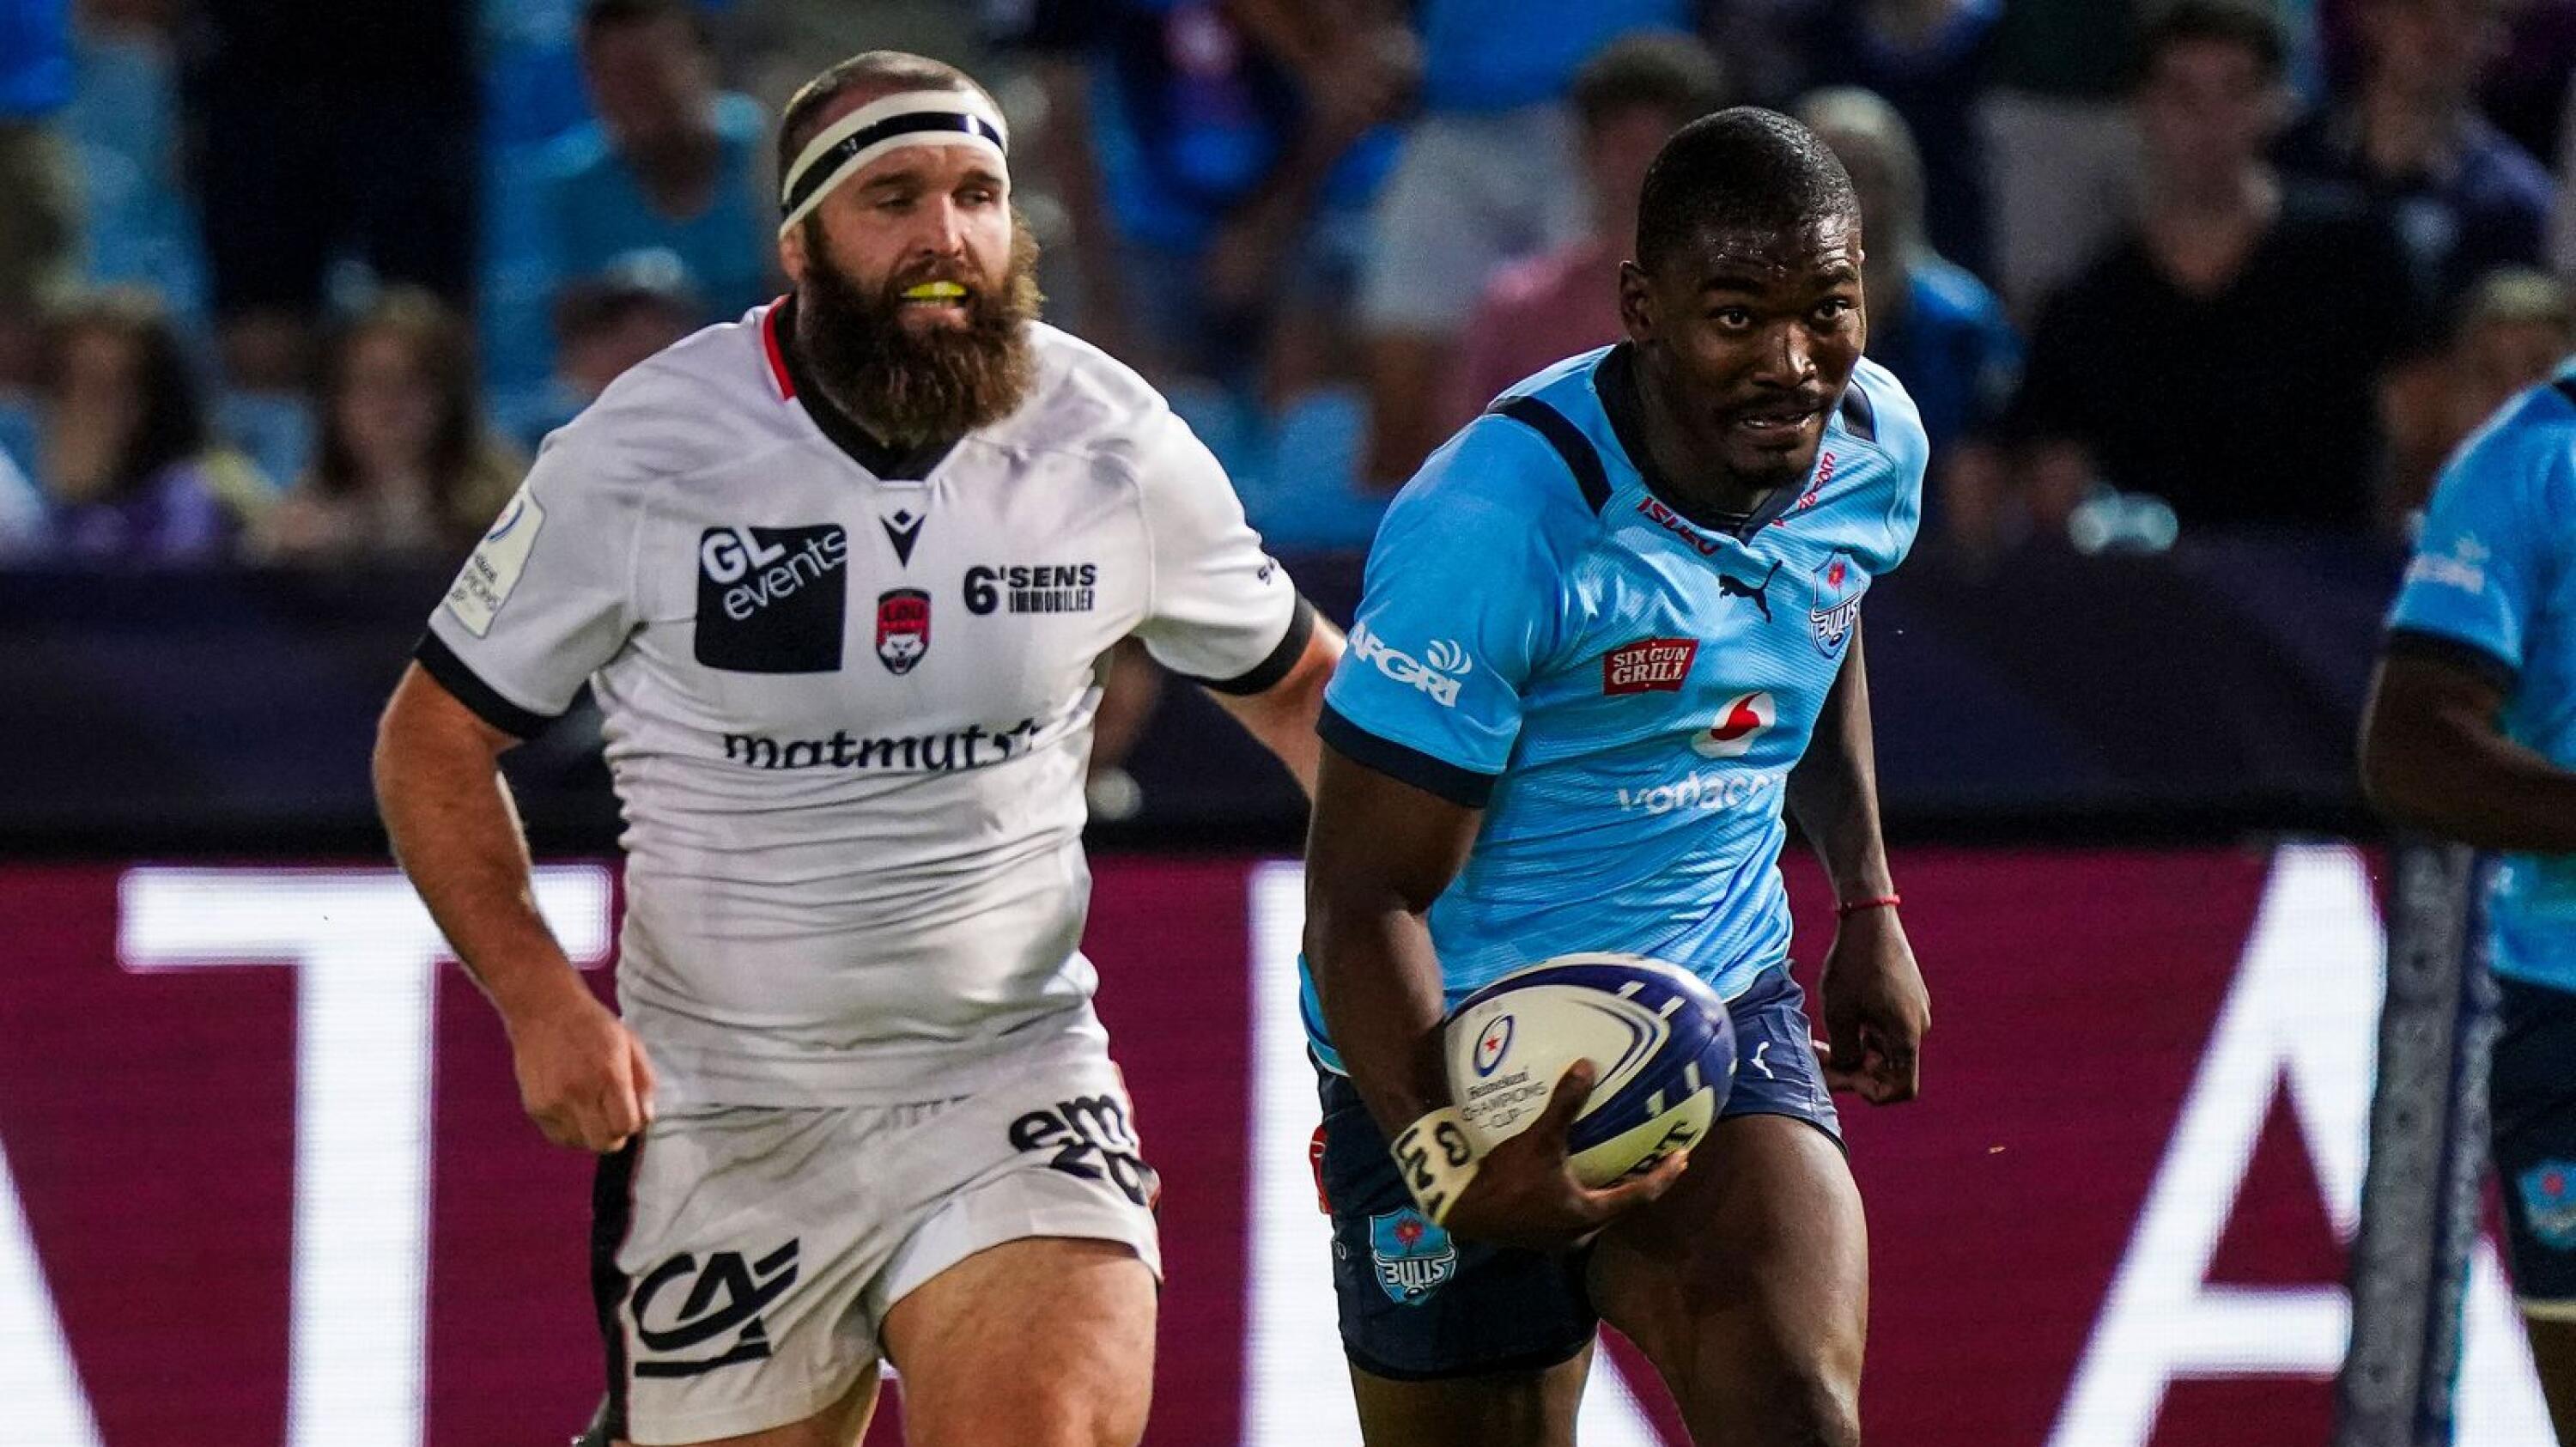 Bulls' player Sibongile Novuka runs with the ball in his side’s Heineken Champions Cup Round 1 Pool A match against Lyon